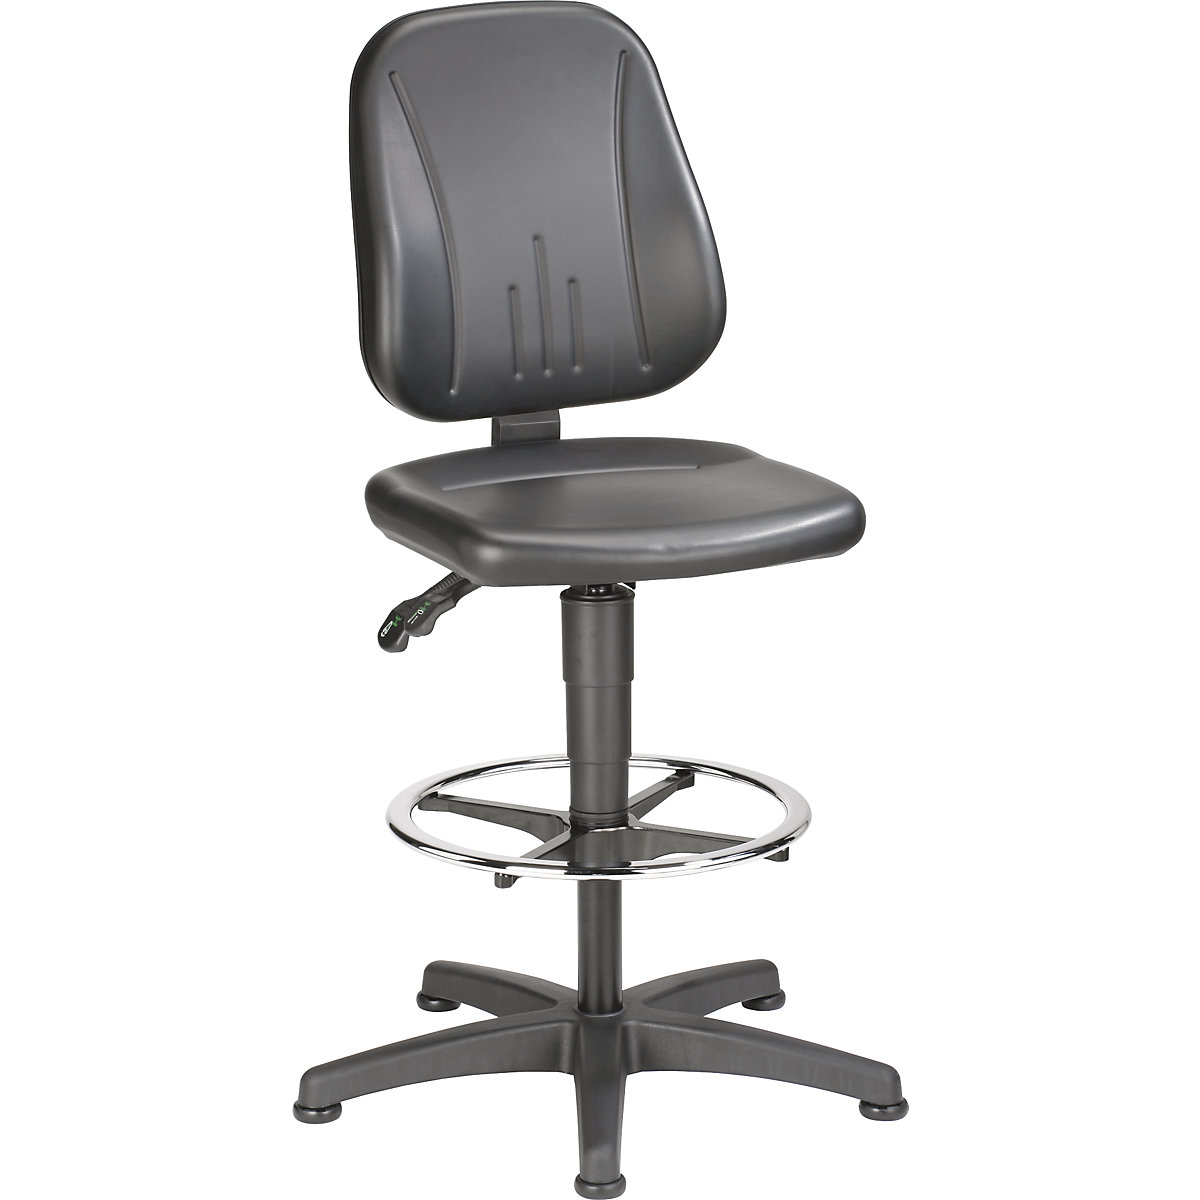 Industrial swivel chair – bimos, with gas lift height adjustment, vinyl cover, black, with floor glides and foot ring-12